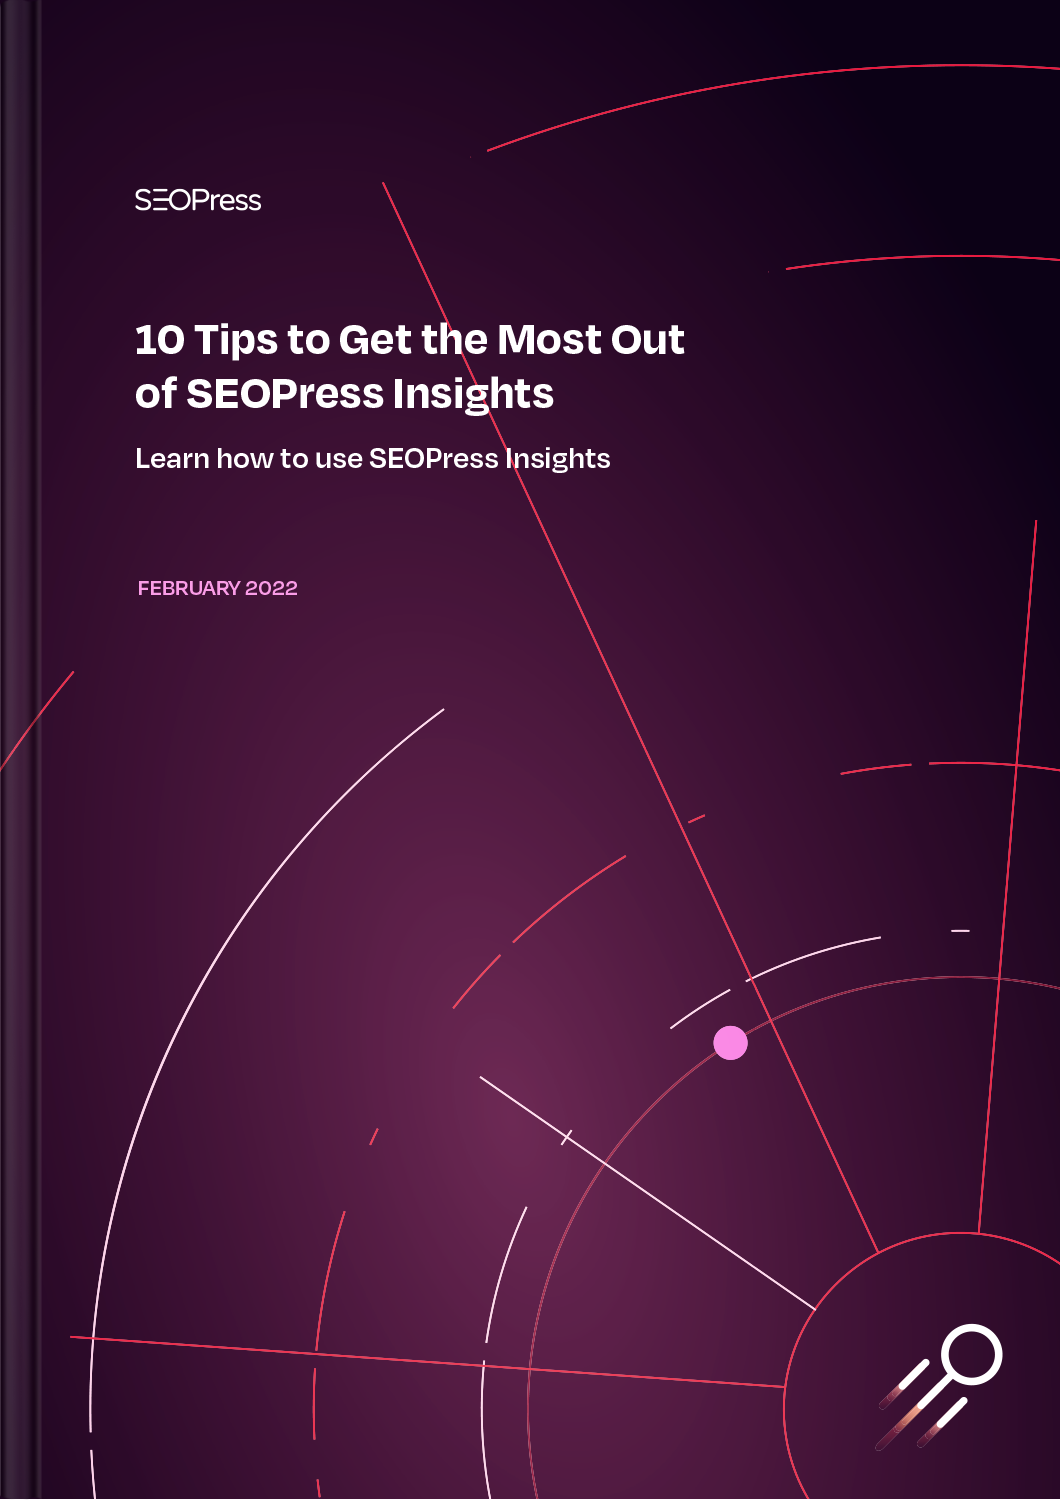 10 Tips to Get the Most Out of SEOPress Insights